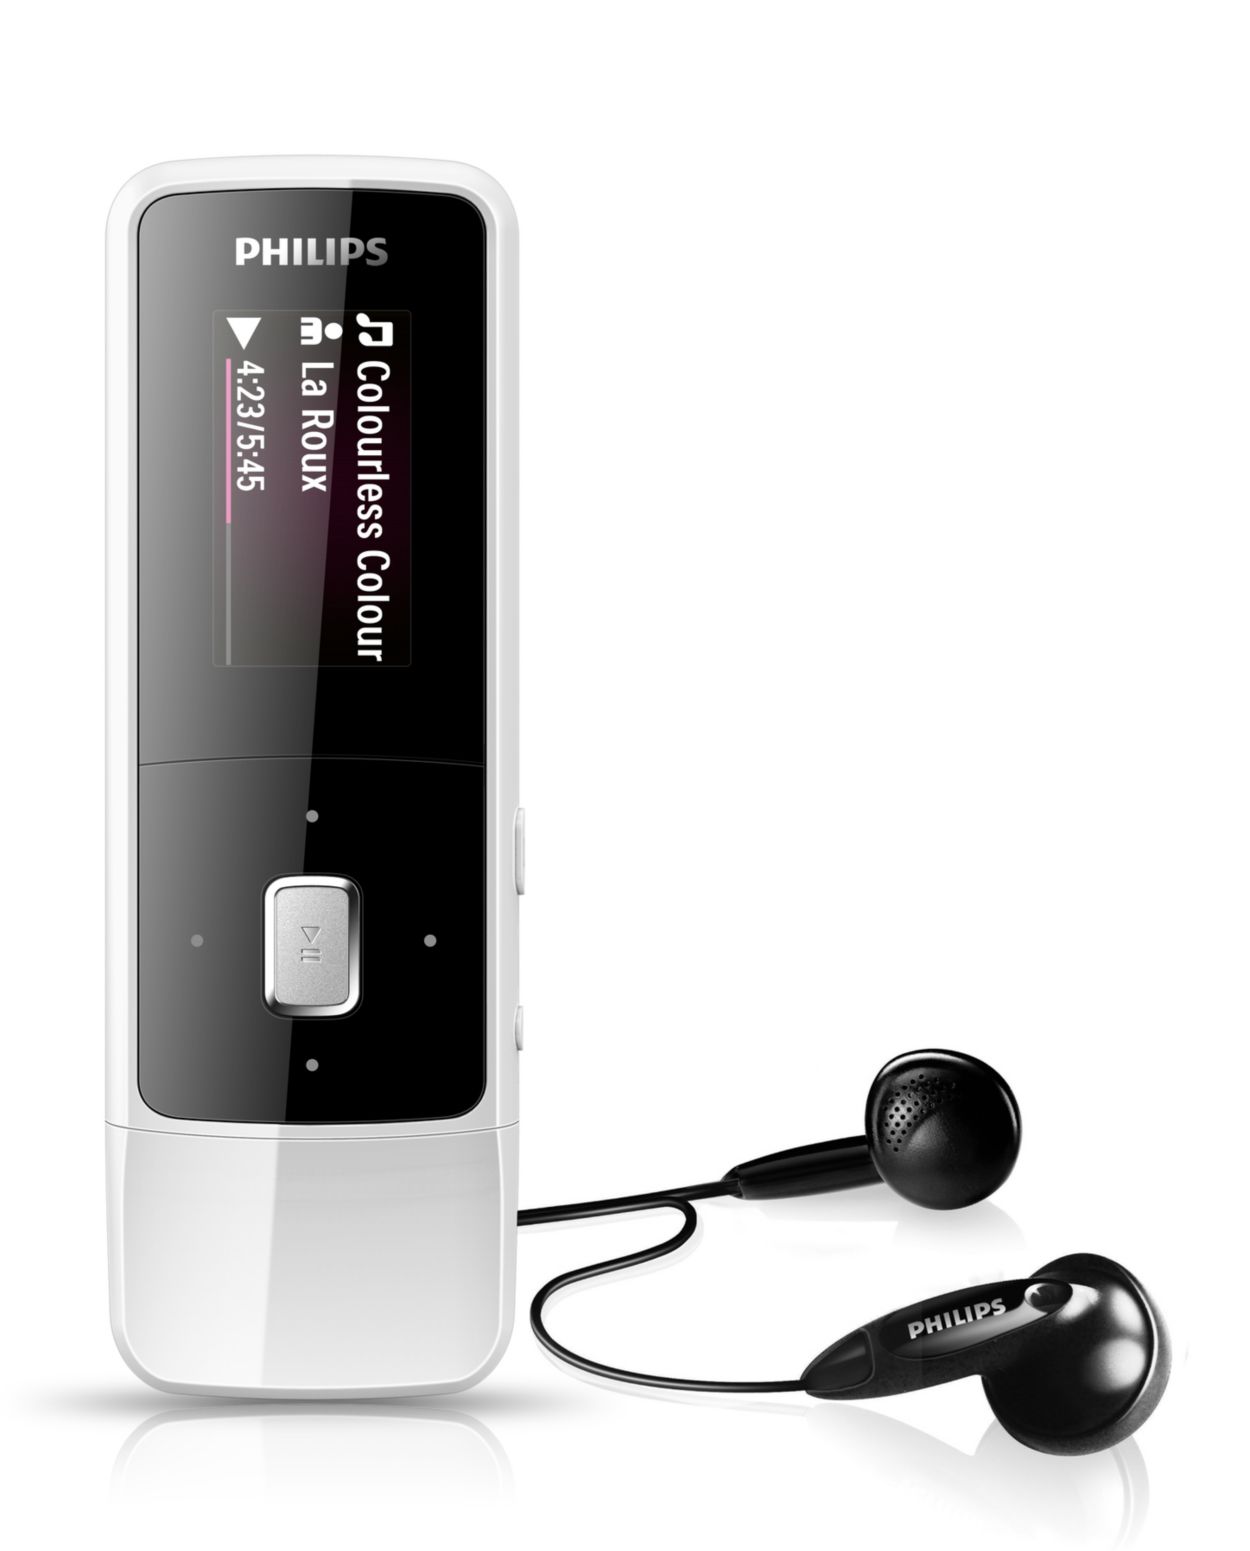 Philips Mp3 Player Drivers